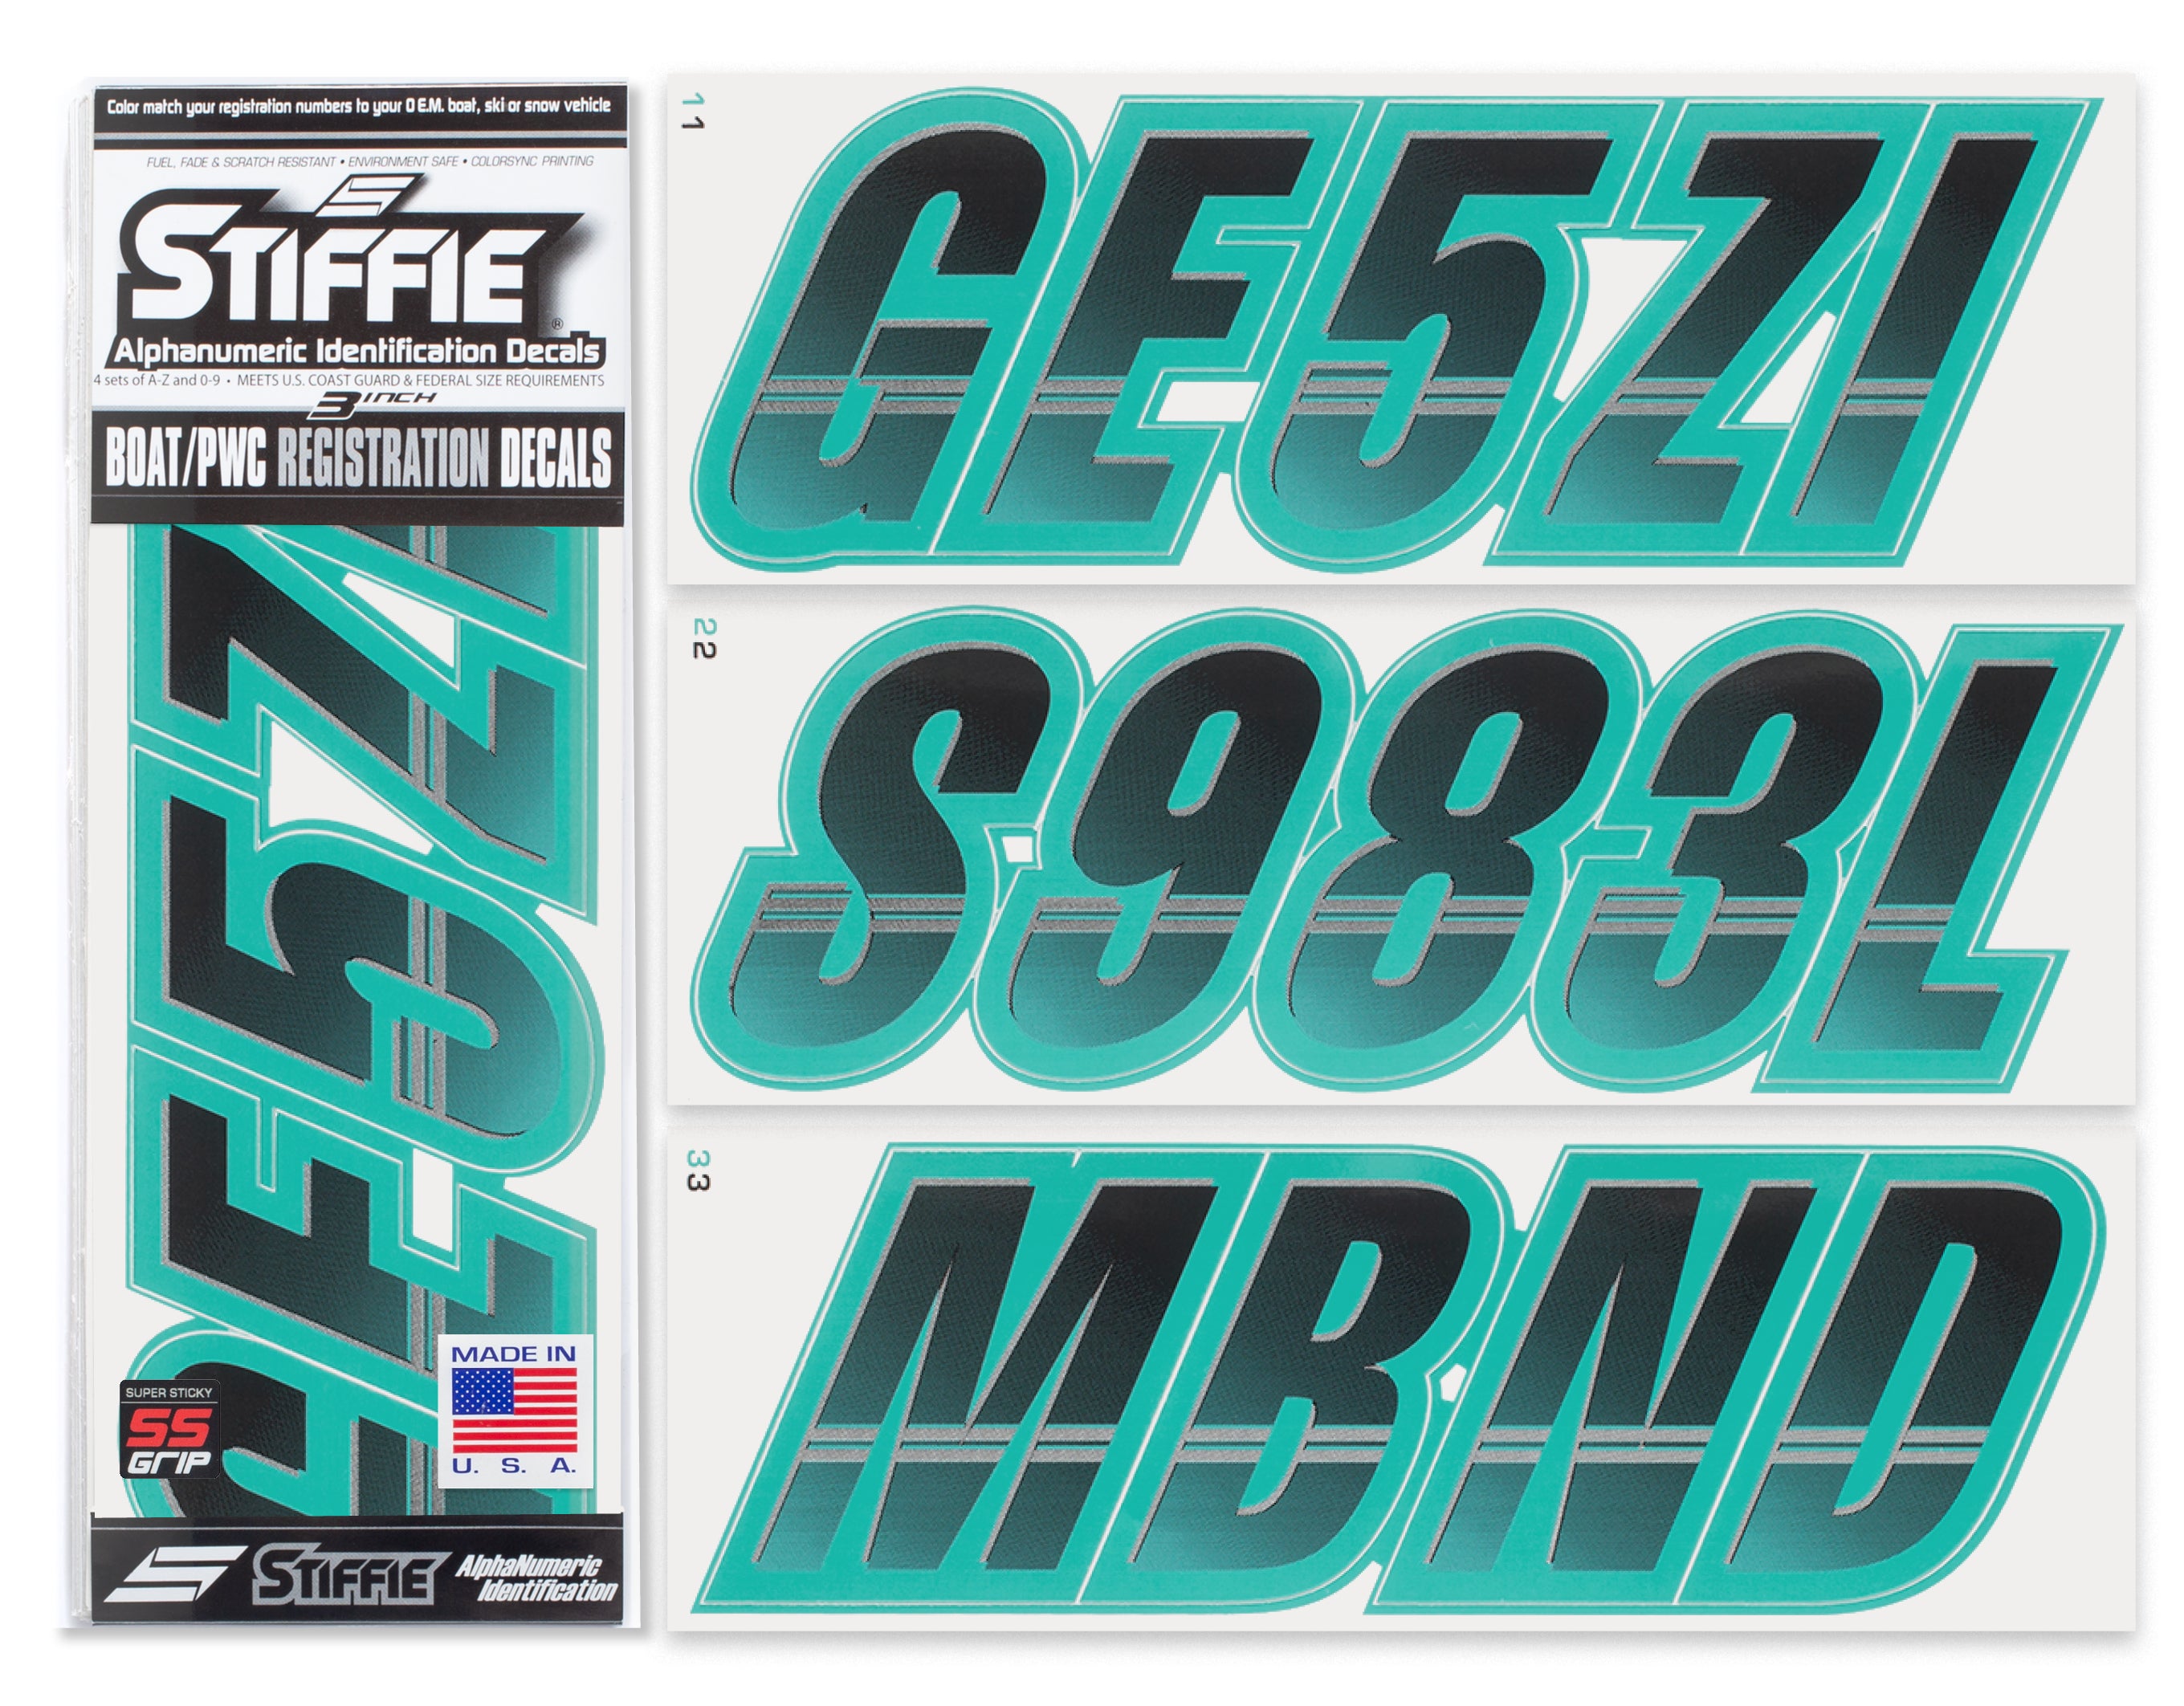 Stiffie Techtron Black/Candy Blue Super Sticky 3" Alpha Numeric Registration Identification Numbers Stickers Decals for Sea-Doo Spark, Inflatable Boats, Ribs, Hypalon/PVC, PWC and Boats.